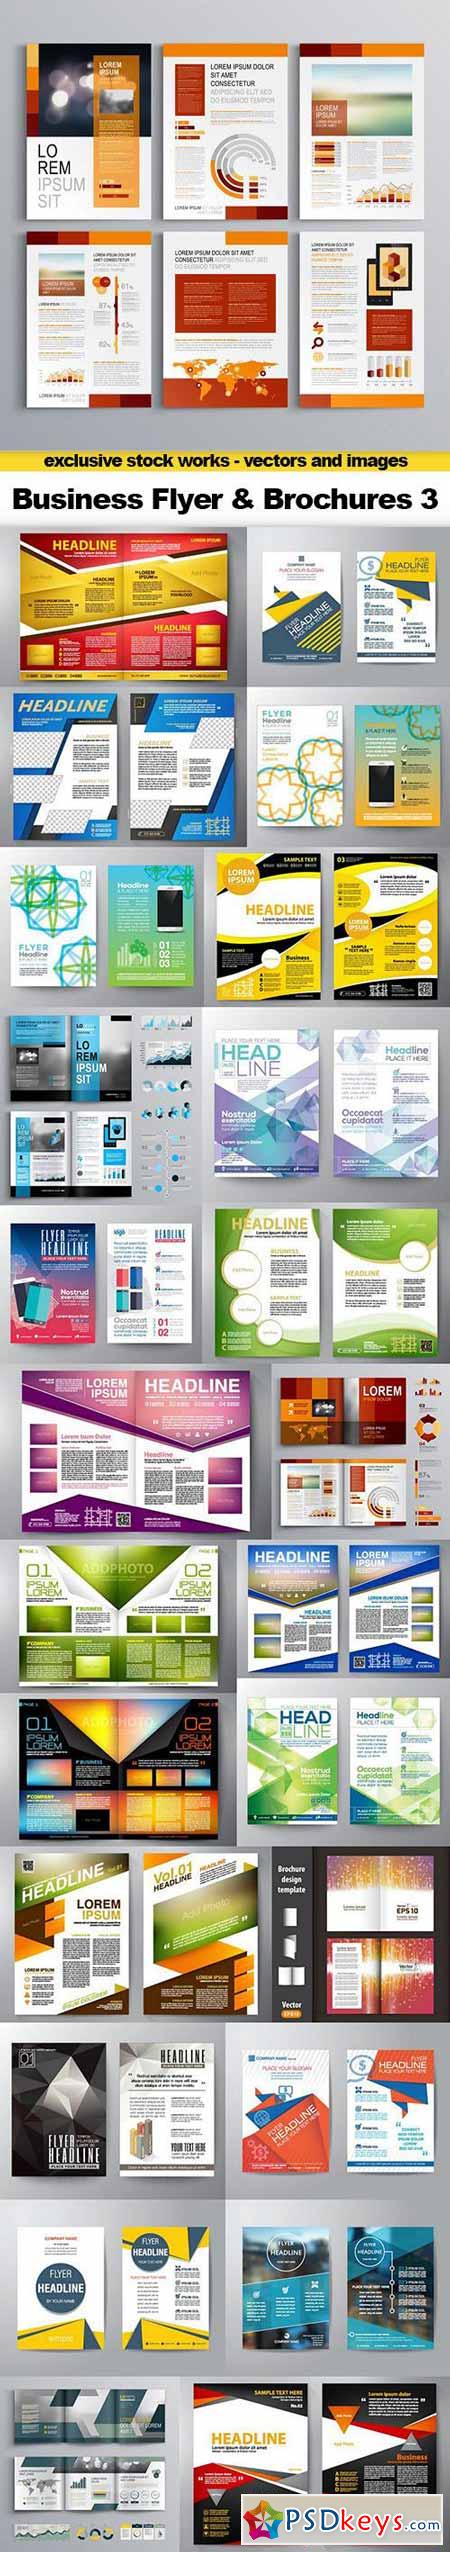 Business Flyer and Brochures - Design Collection 3, - 25xEPS